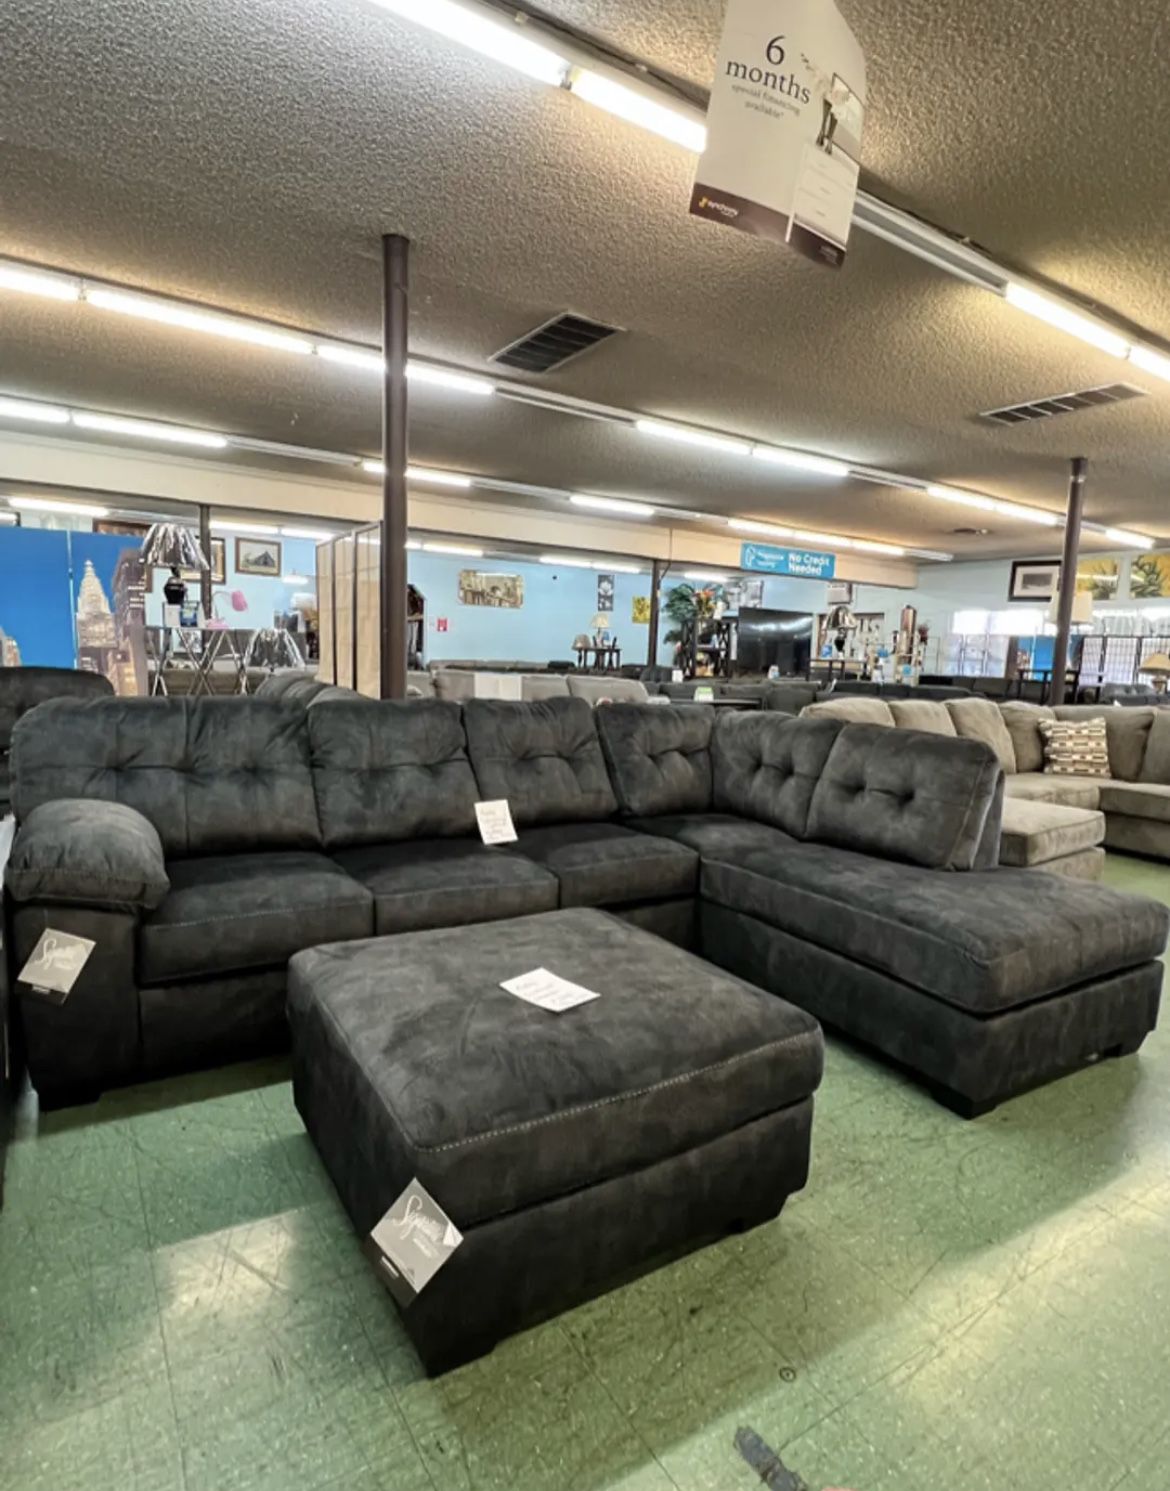 🔥Hot Deal🔥Brand New 2pc Name Brand Sectional Couch $1399, Finance Available 